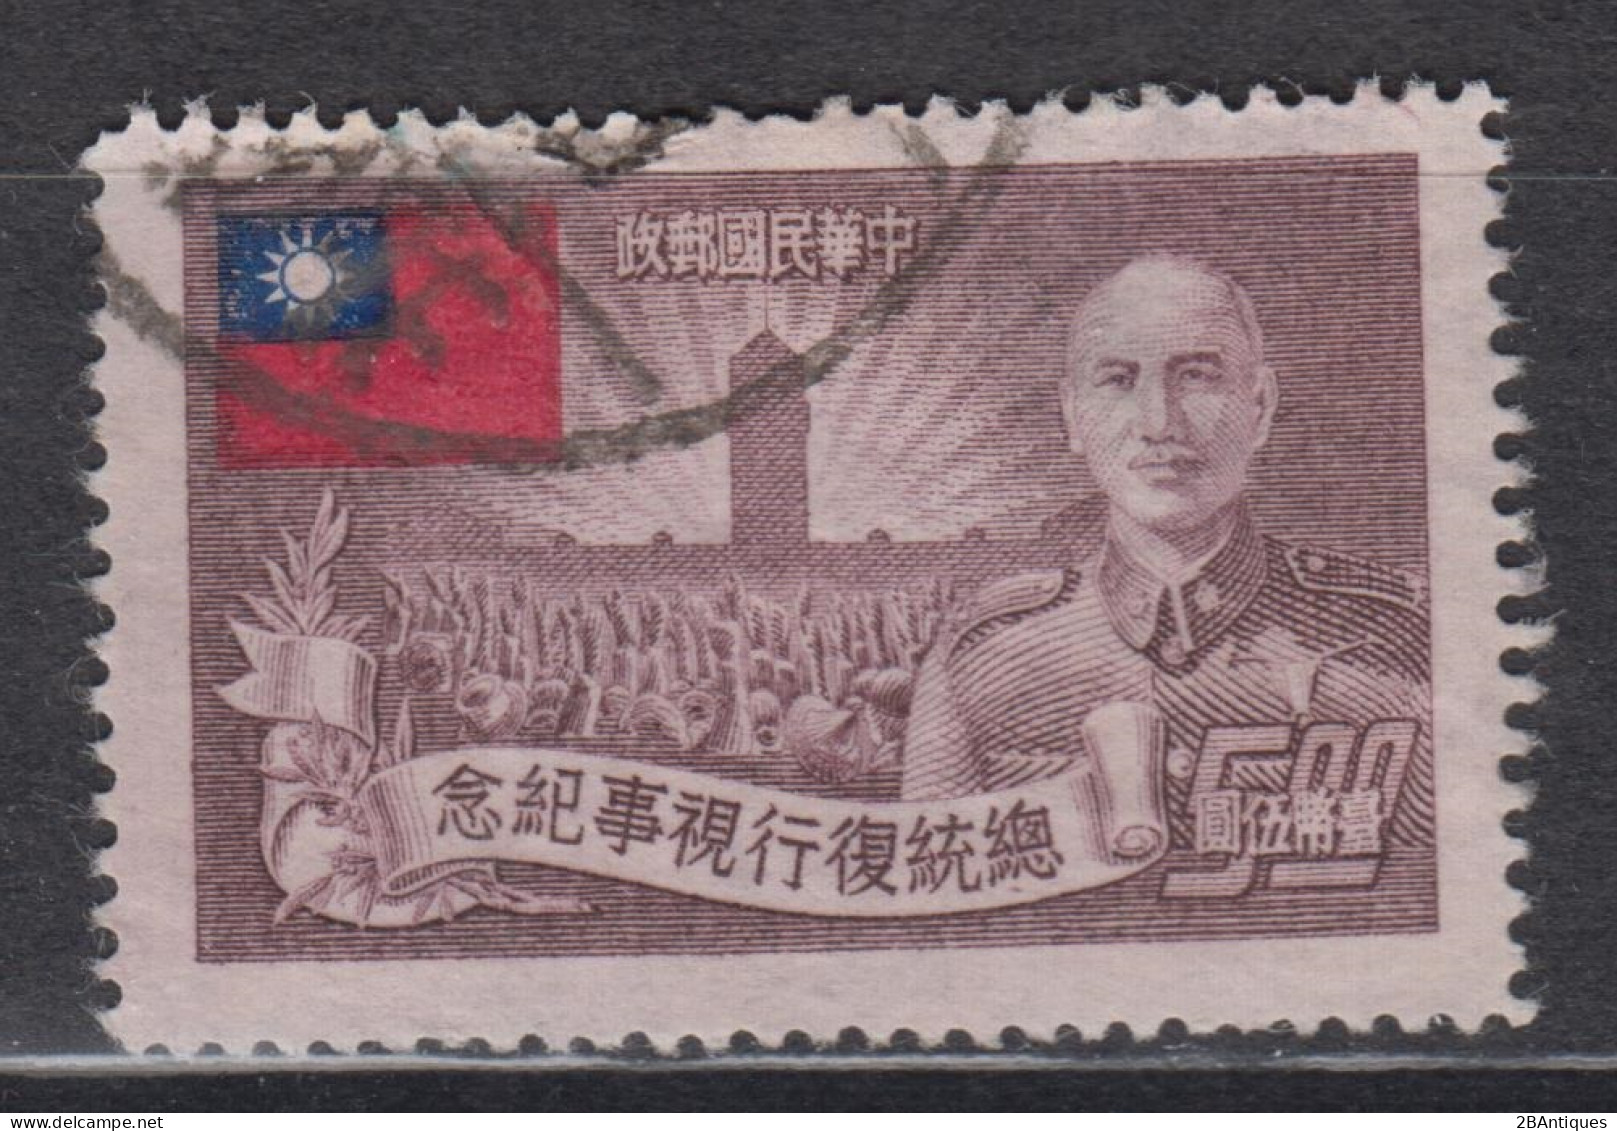 TAIWAN 1952 - The 3rd Anniversary Of Re-election Of President Chiang Kai-shek KEY VALUE! - Oblitérés